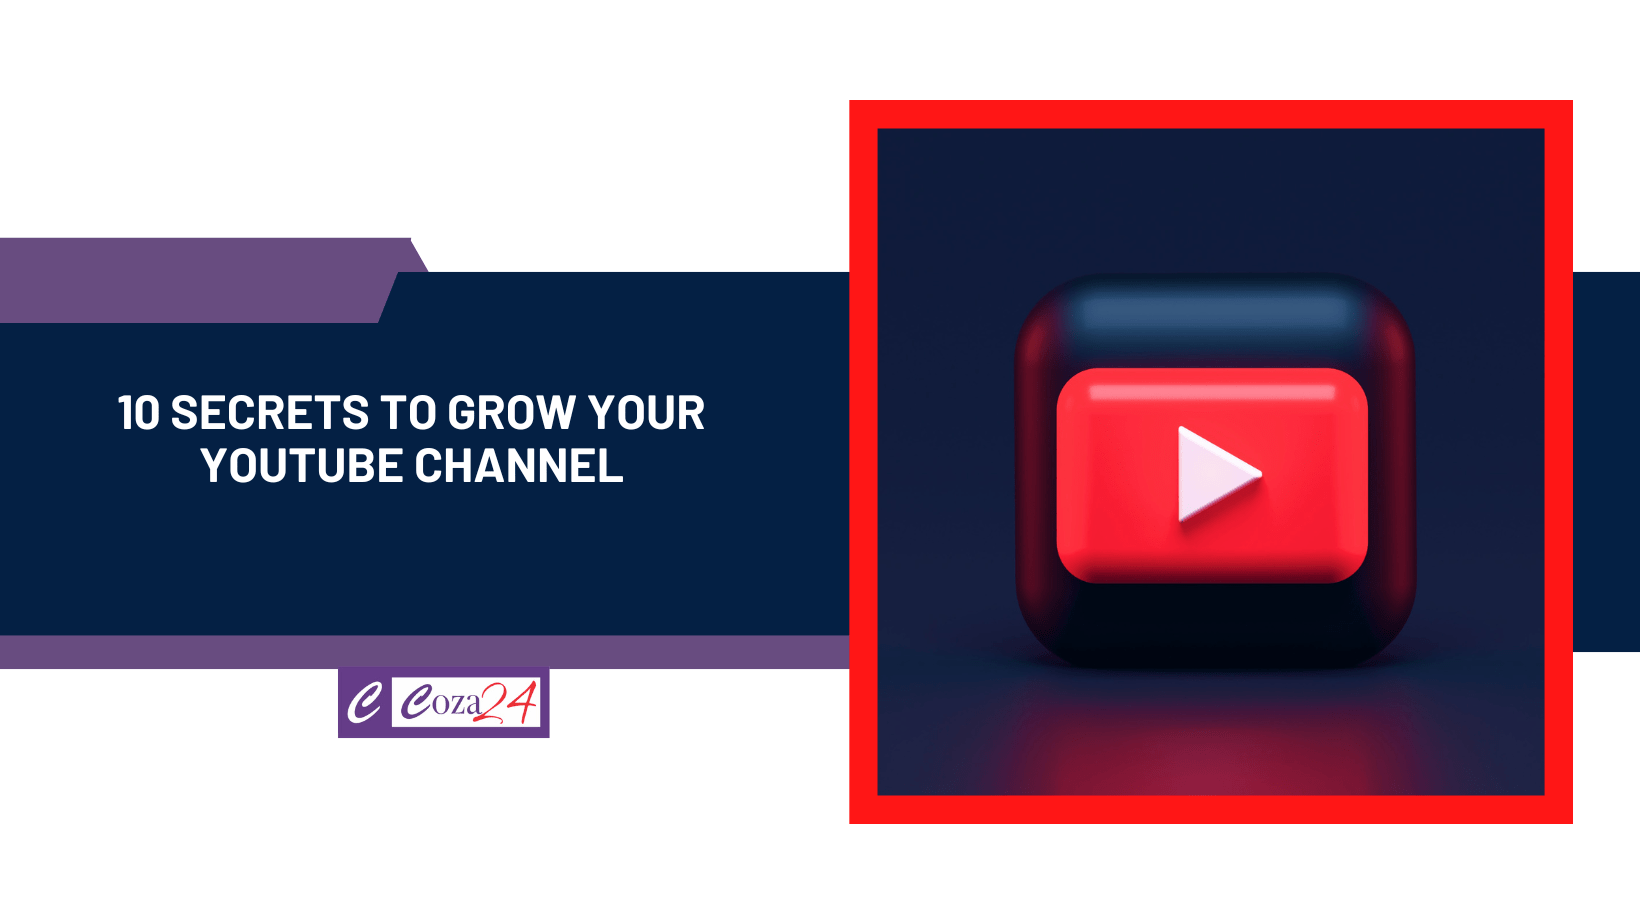 10 secrets to grow your YouTube channel